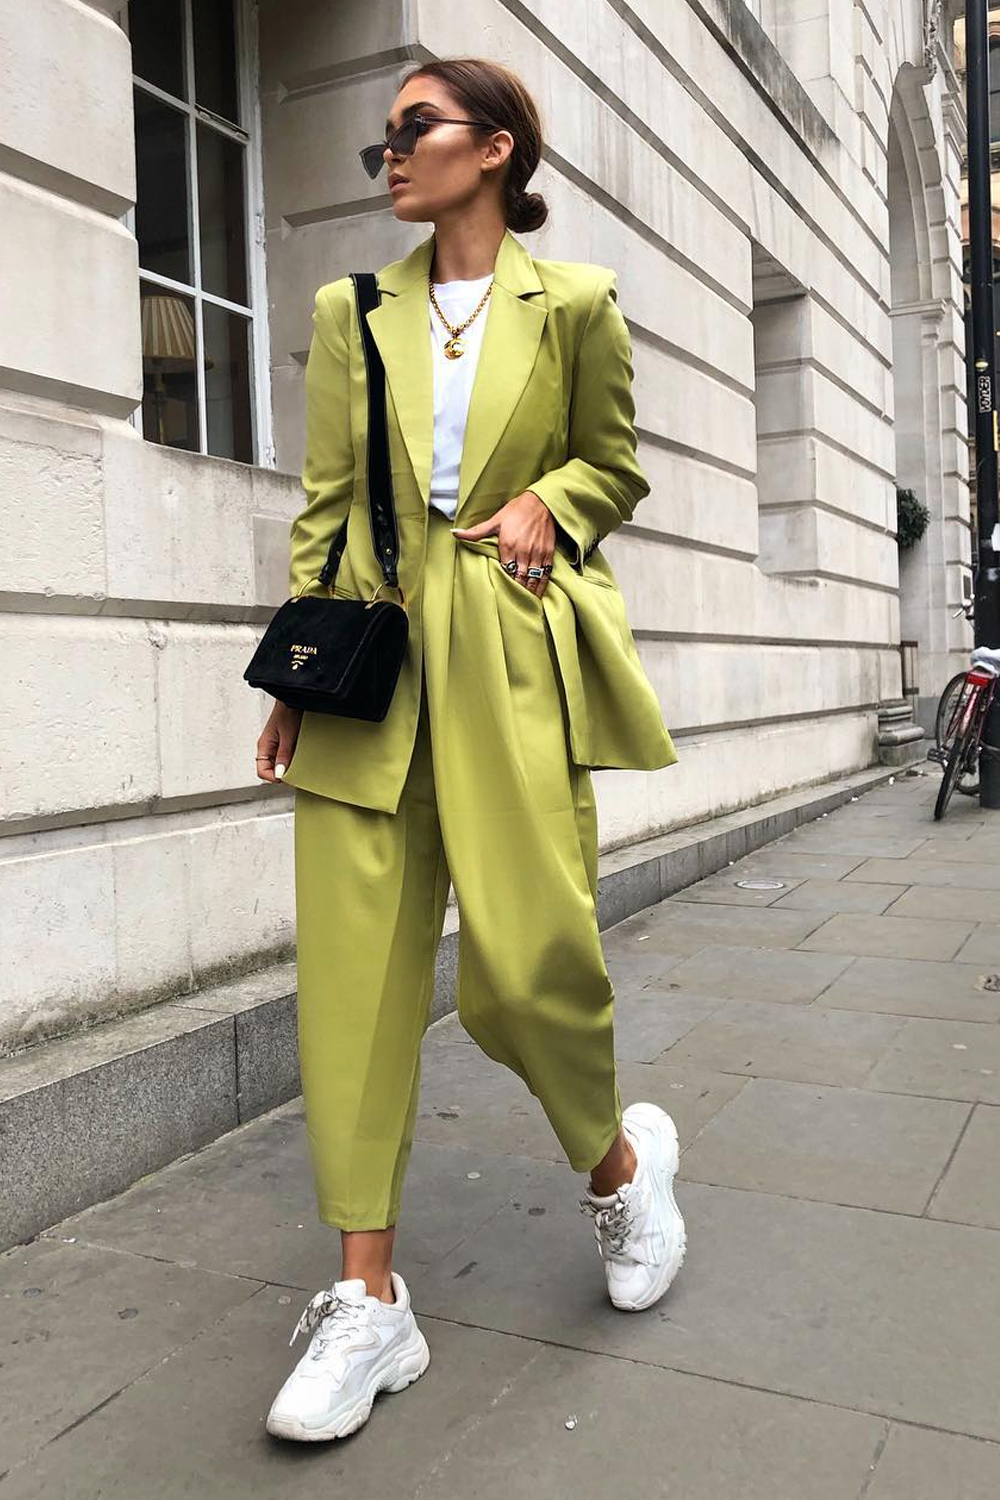 The Green Suit Trend Is Everywhere Right Now | Who What Wear UK